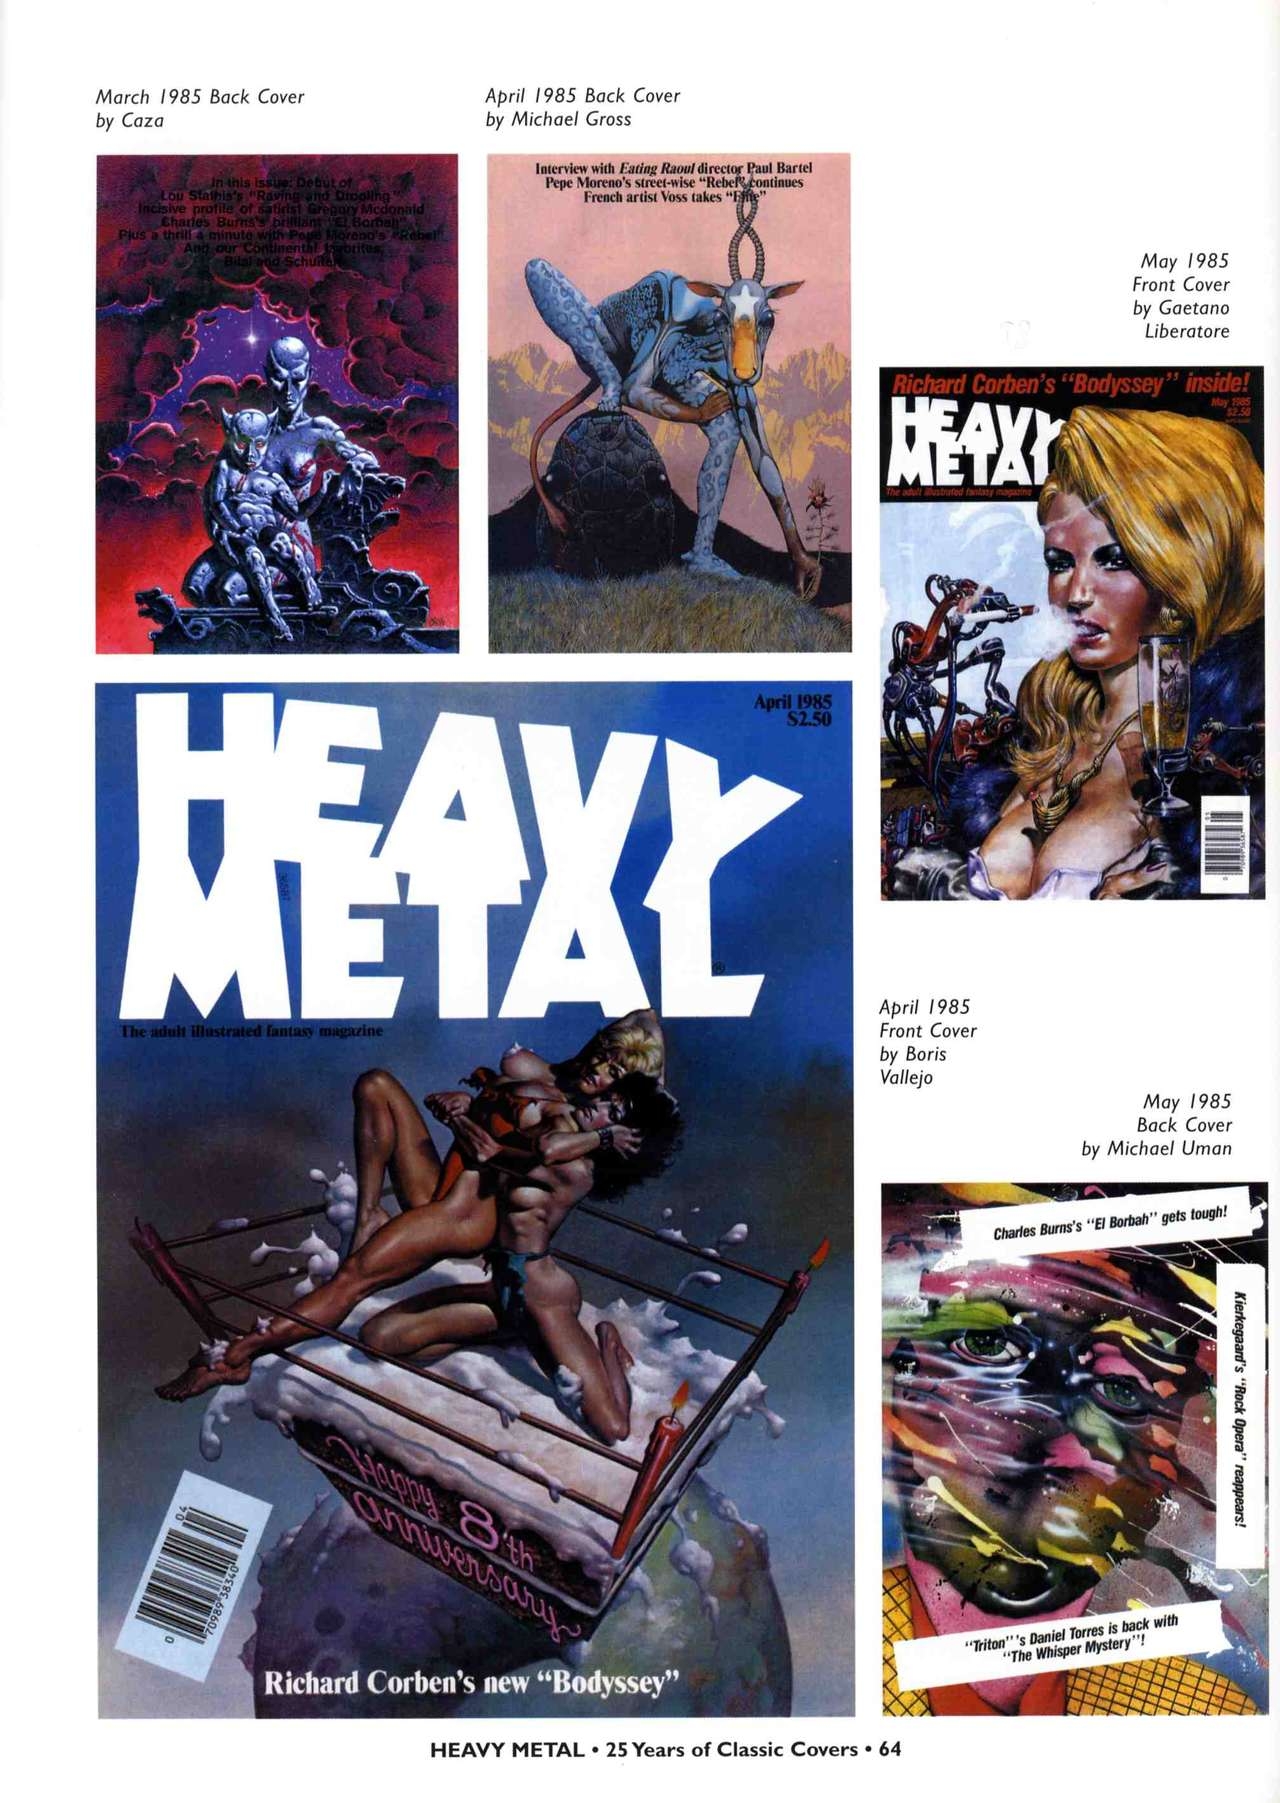 HEAVY METAL 25 Years of Classic Covers 69